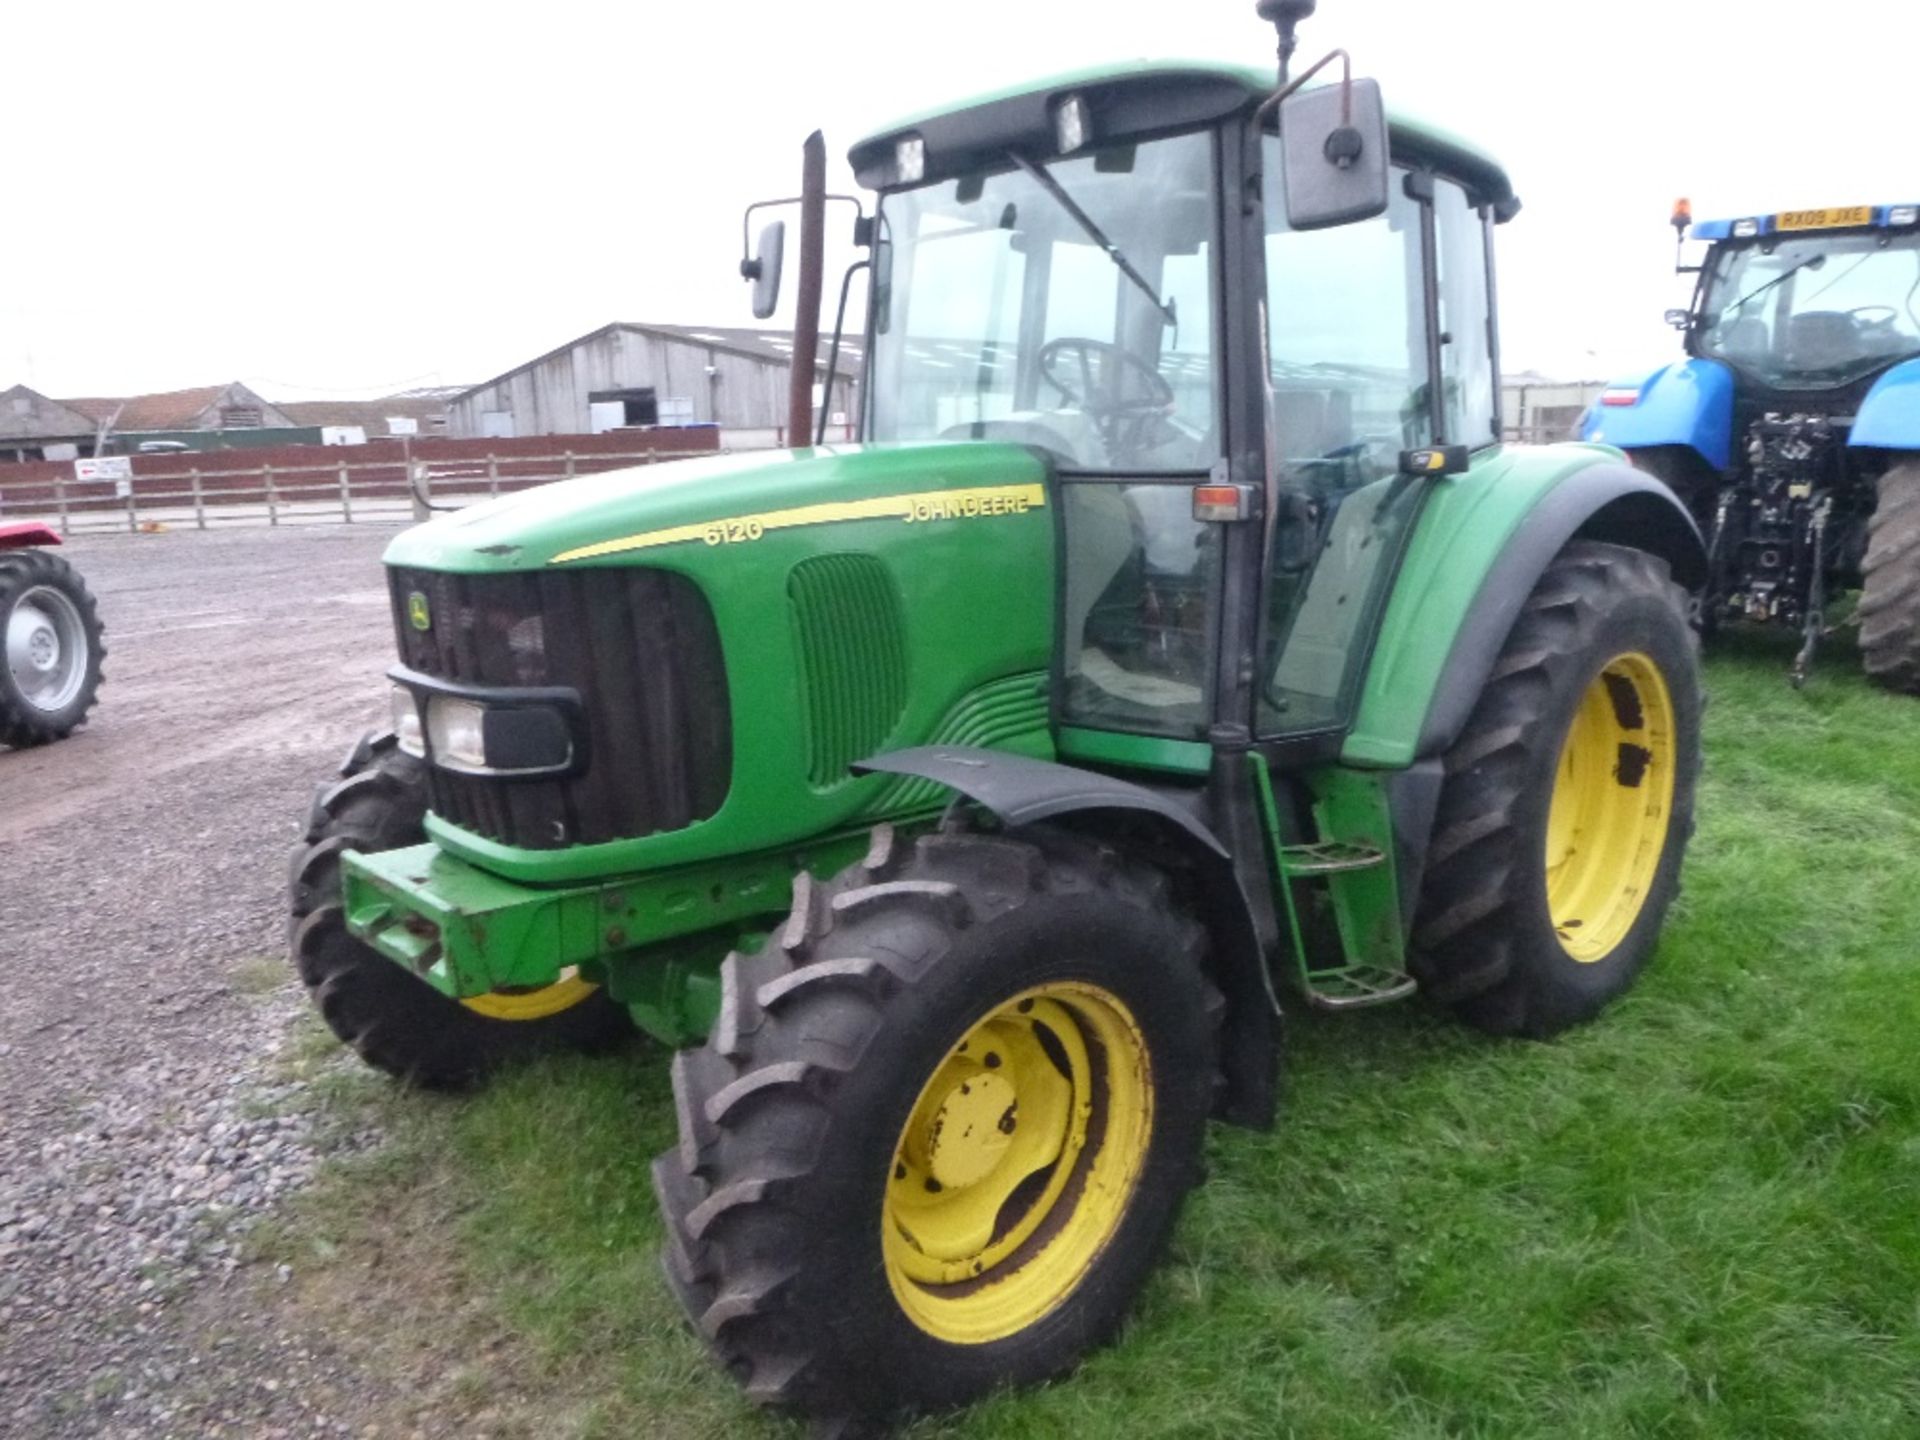 John Deere 6120 4wd Tractor. V5 will be supplied